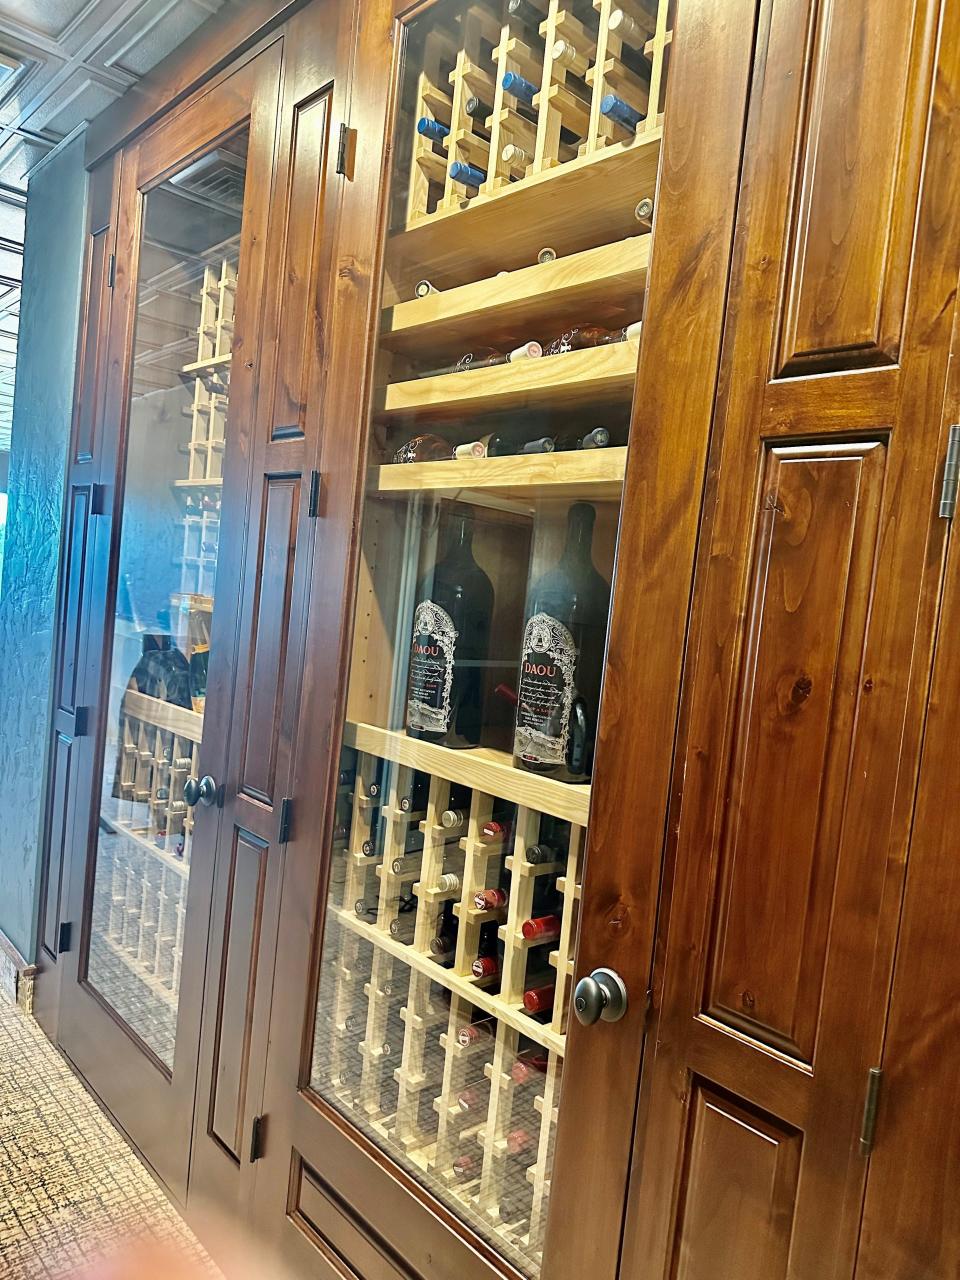 The wine cabinet from Emilio's Prime Steakhouse. The cabinet holds over 300 different types of wine.